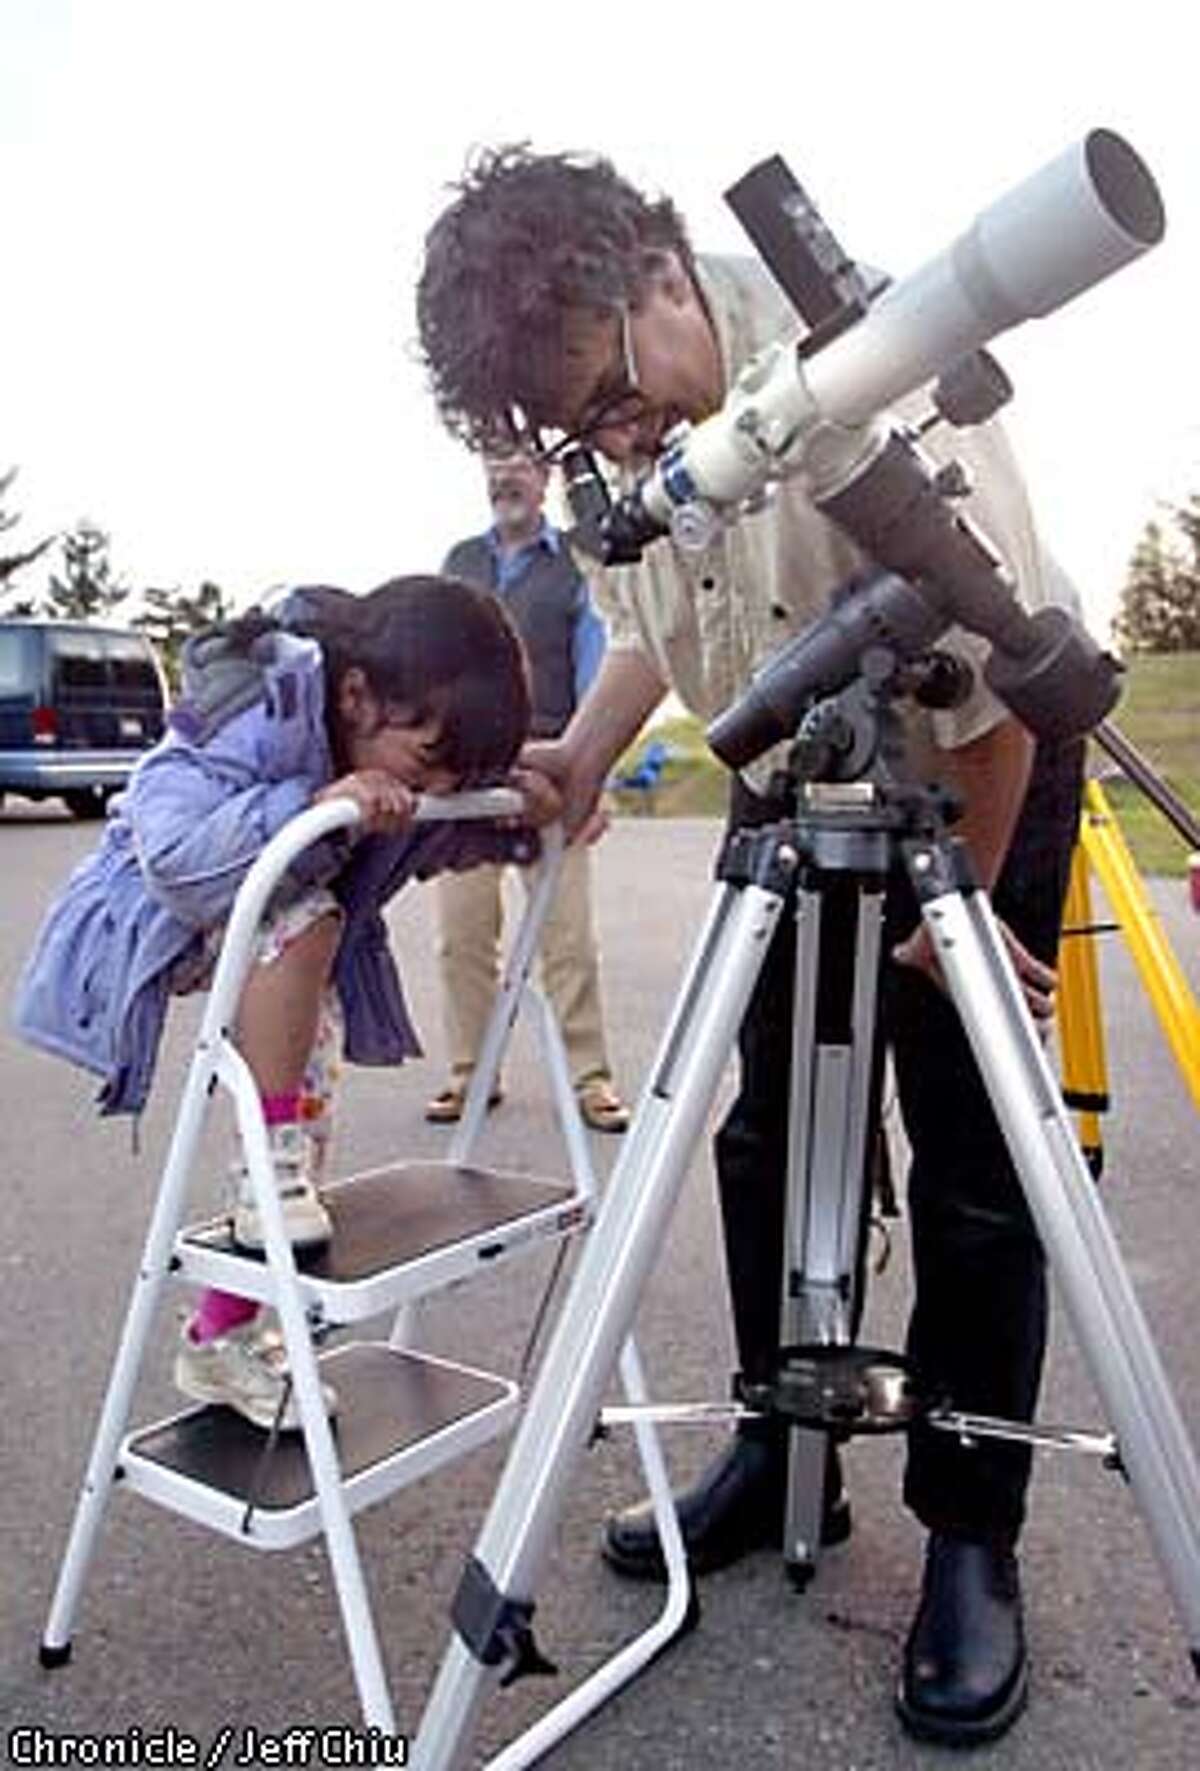 Alex Adams of San Francisco looks through his daughter Ingrid's, 5, Takahashi FC 60mm refractor telescope as Ingrid waits as they and other members of the San Francisco Amatuer Astronomers group prepare for a star party on Mount Tamalpais on Saturday evening. Photo by Jeff Chiu / The Chronicle.